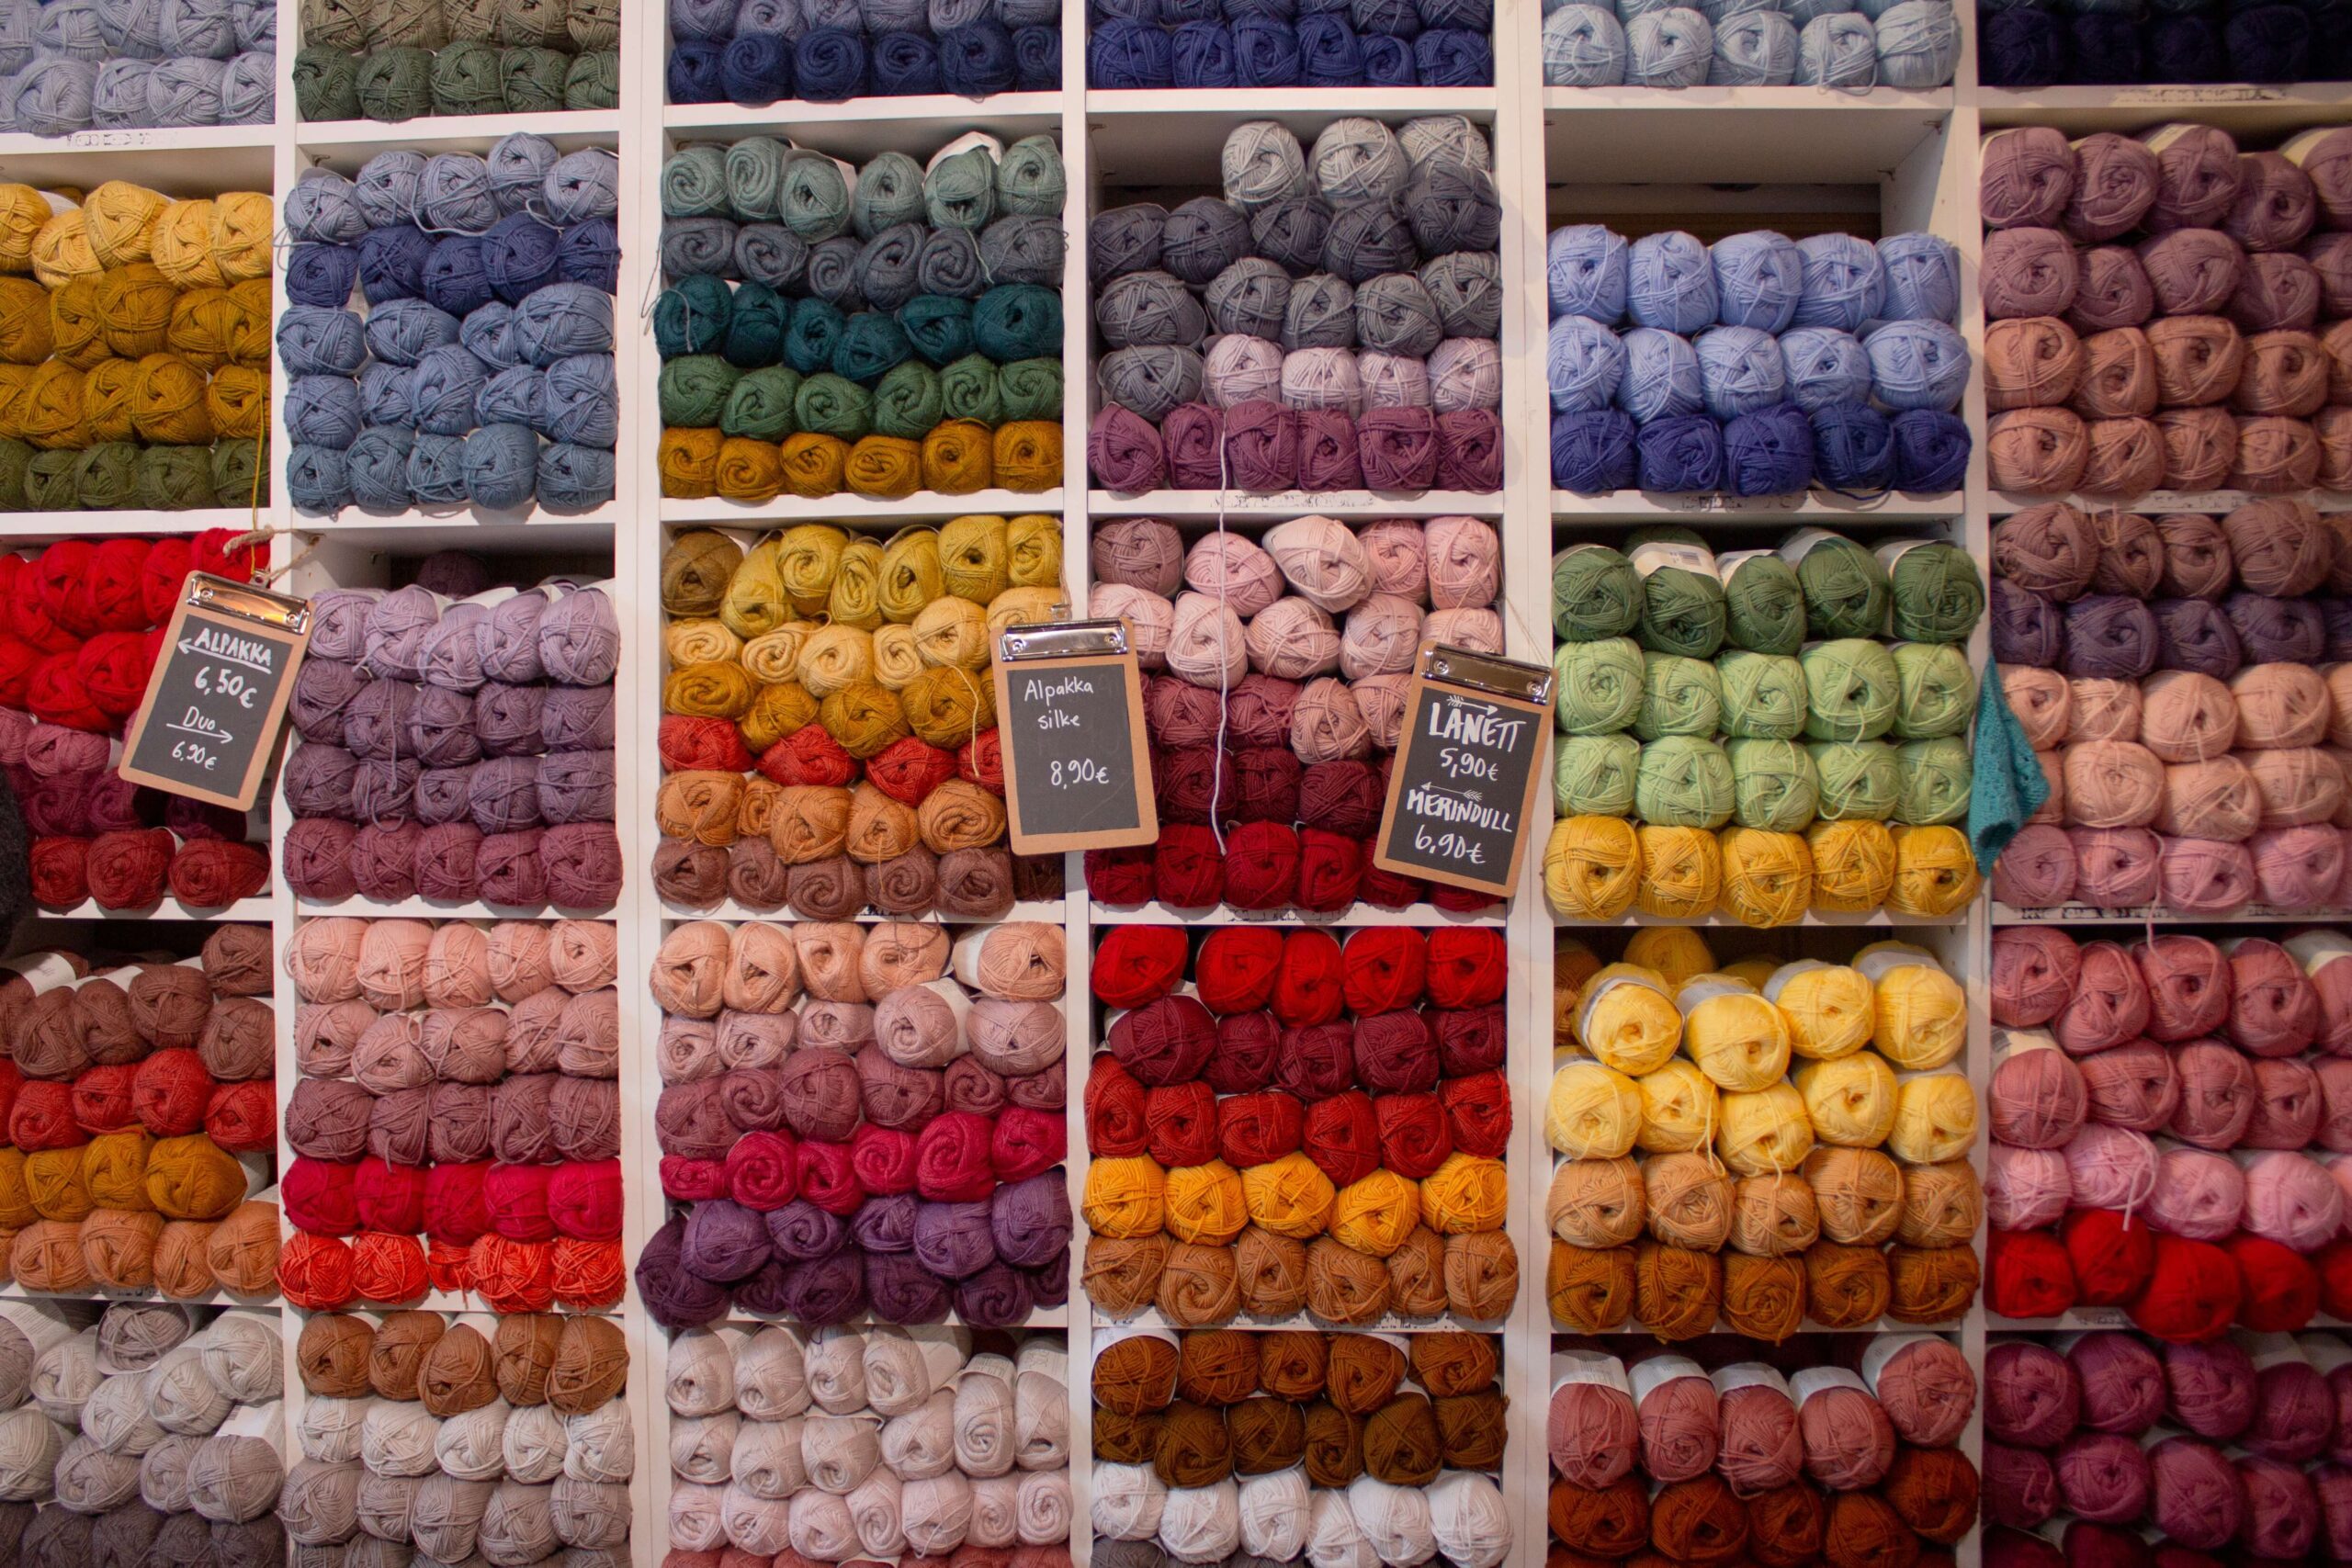 Shelves of balls of wool on display in a shop. Hundreds of balls of wool arranged into groups of different bright and pastel colours. Three small blackboards hand from the shelves displaying the prices.